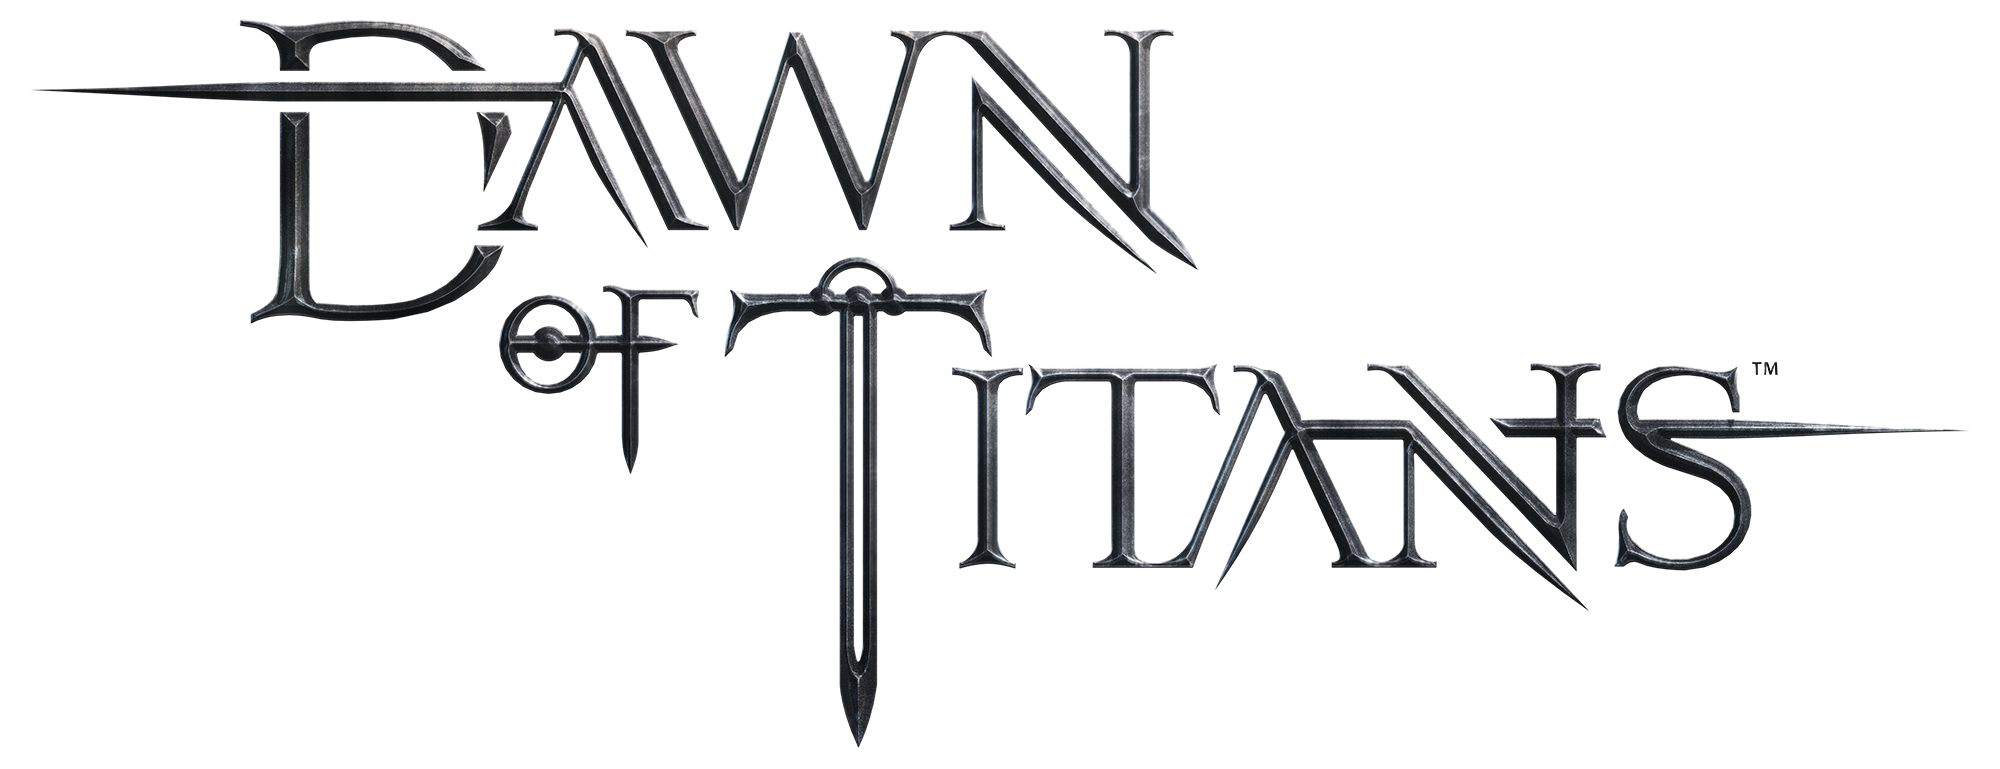 Zynga finally releases its epic action strategy mobile game Dawn of Titans